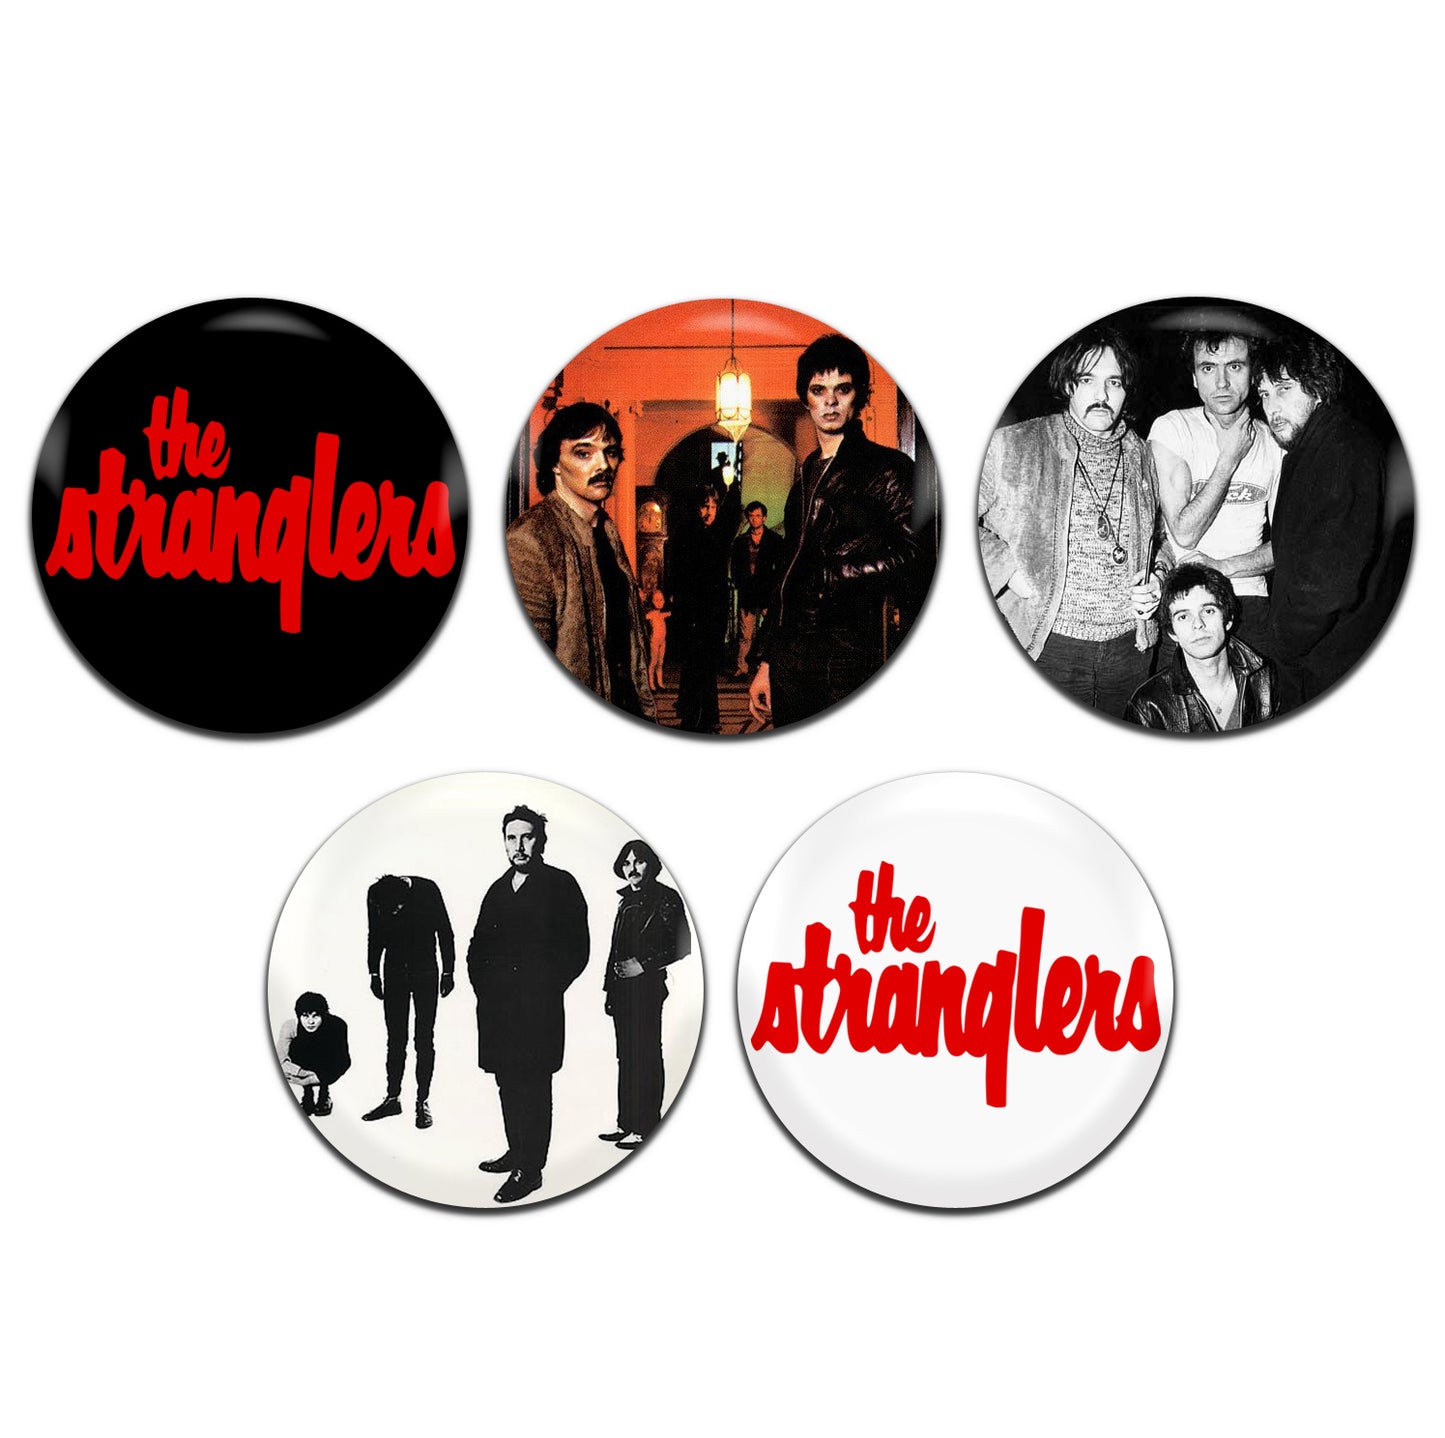 The Stranglers Punk Rock New Wave Band 70's 25mm / 1 Inch D-Pin Button Badges (5x Set)